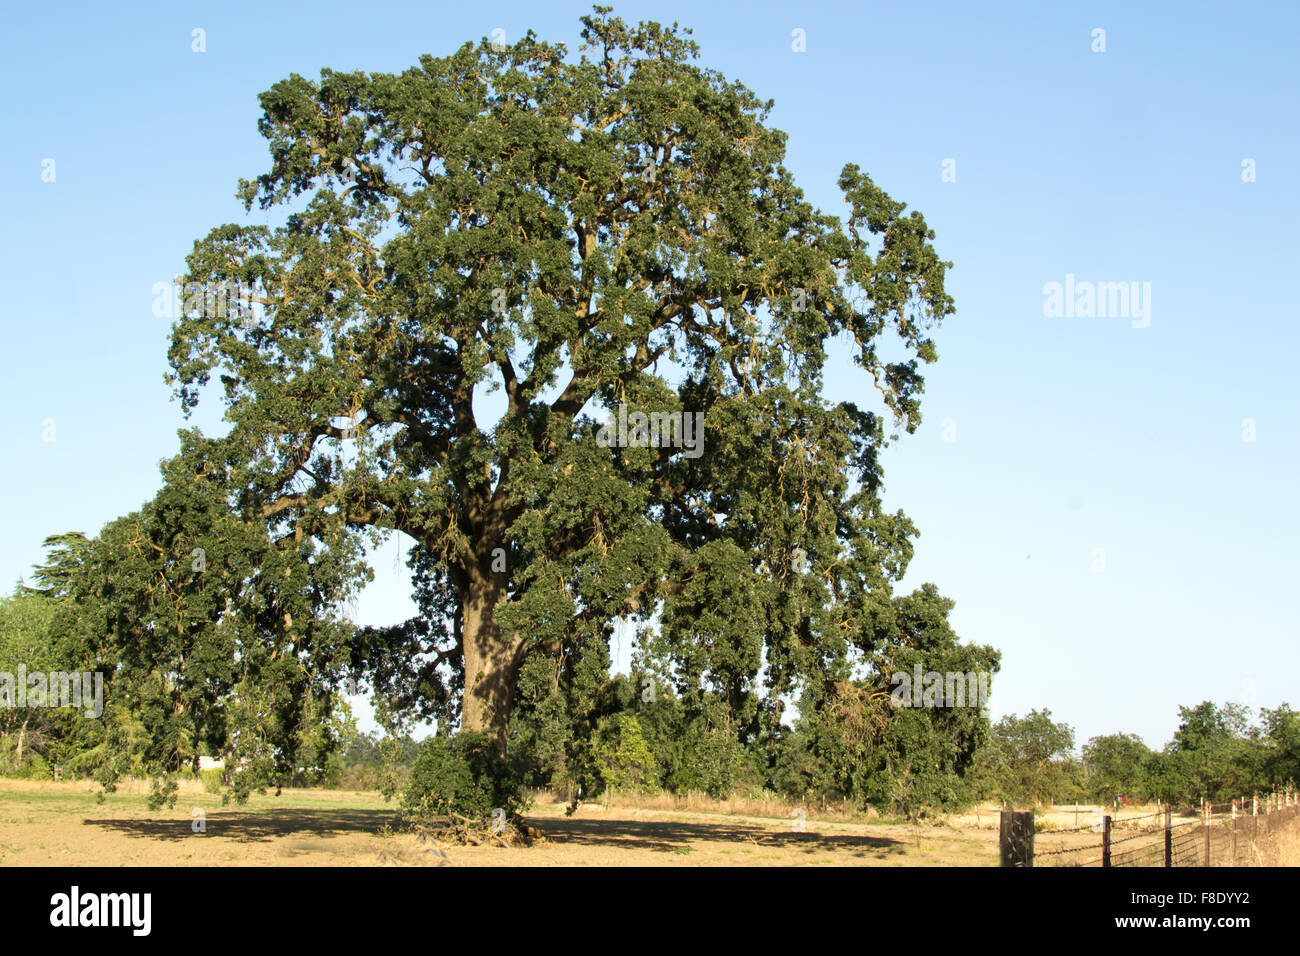 oak-tree-in-the-very-dry-central-valleys